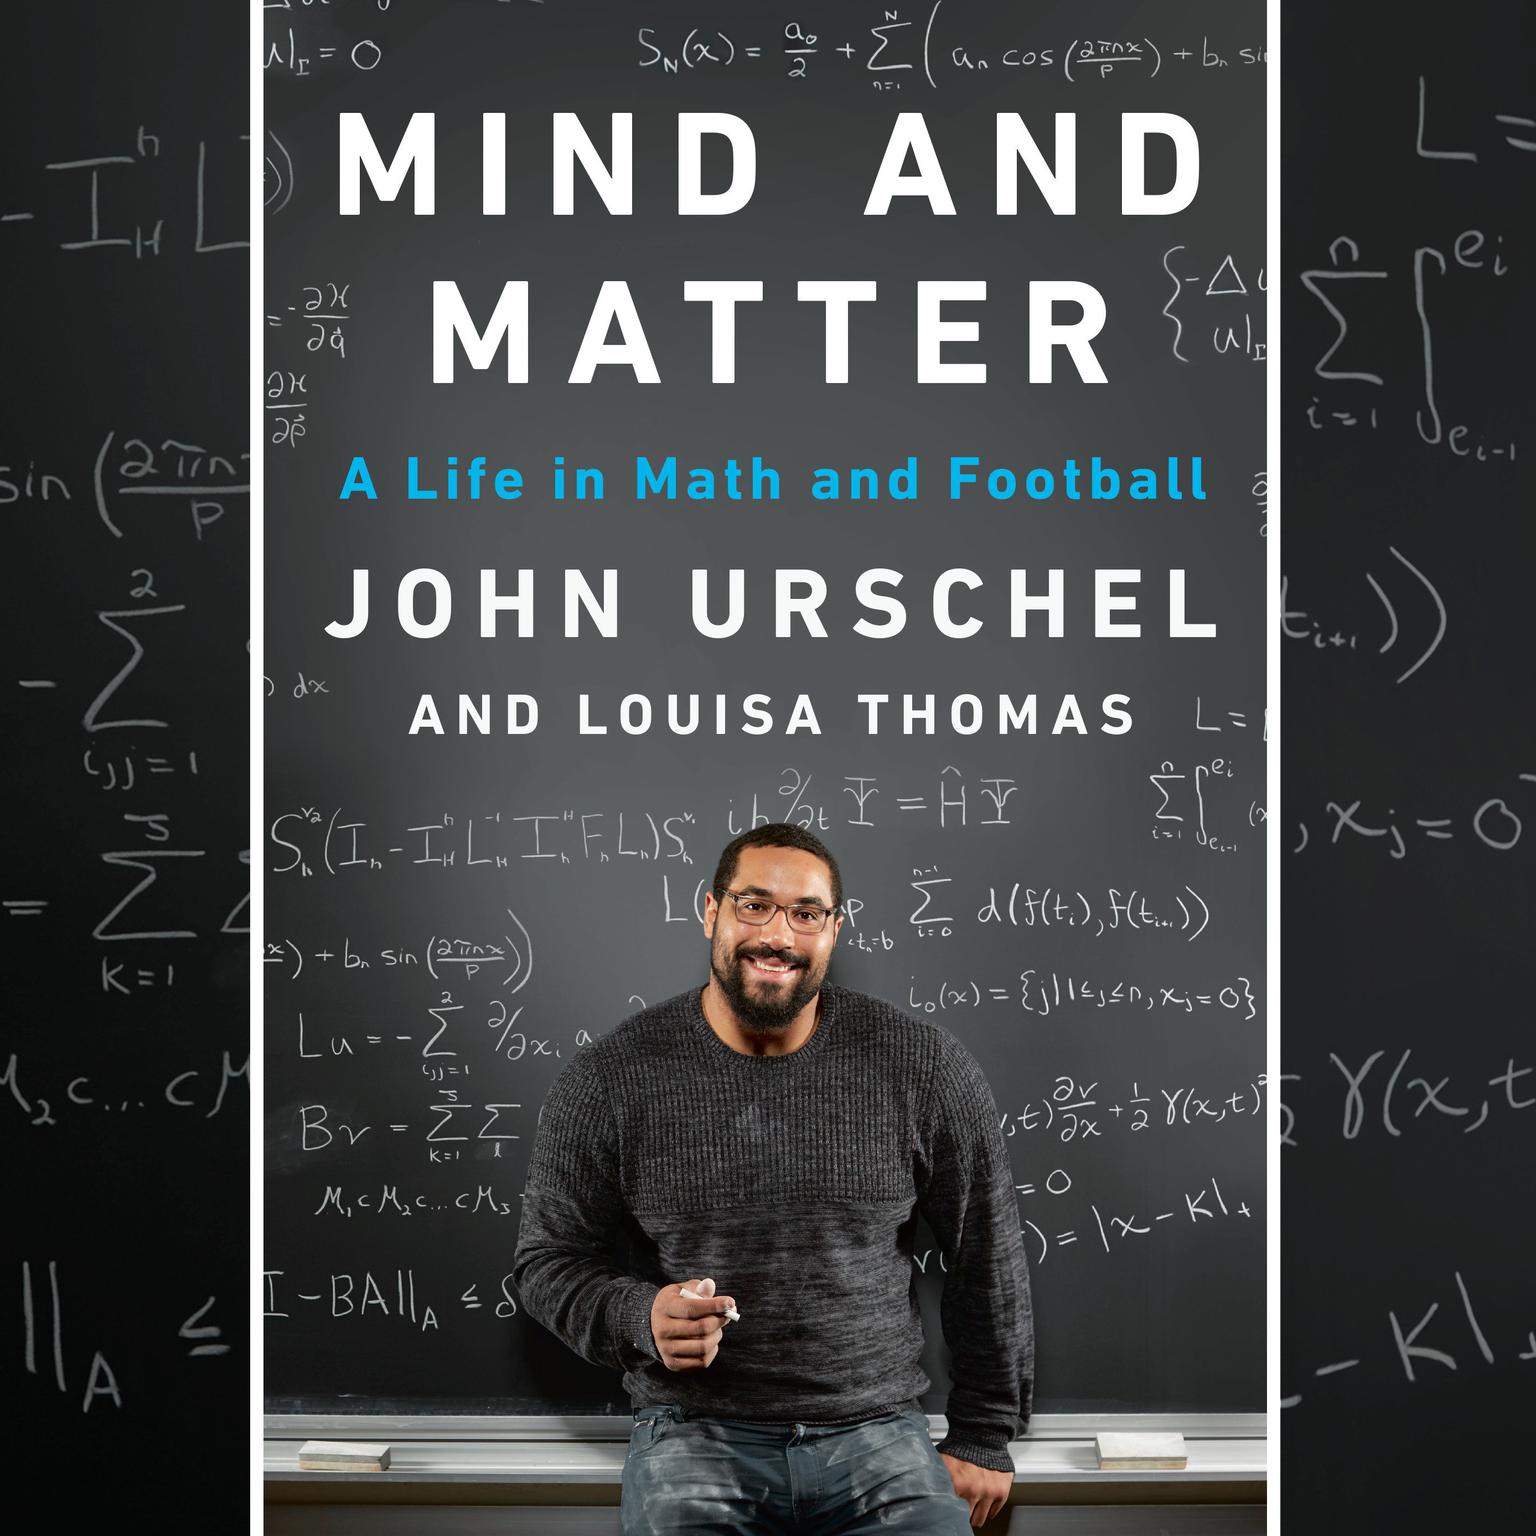 Mind and Matter: A Life in Math and Football Audiobook, by Louisa Thomas